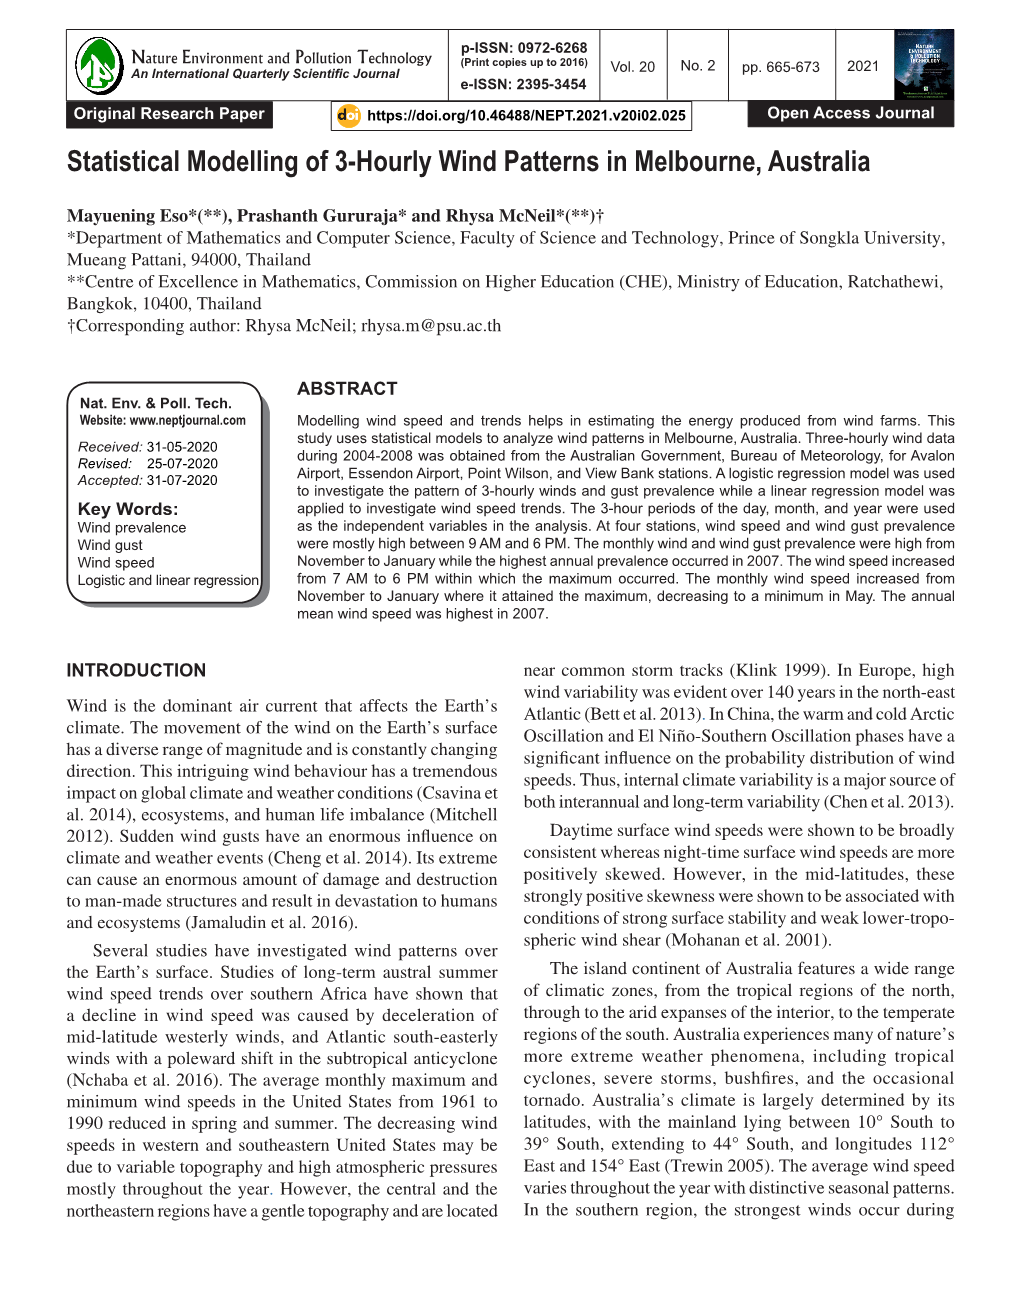 Statistical Modelling of 3-Hourly Wind Patterns in Melbourne, Australia